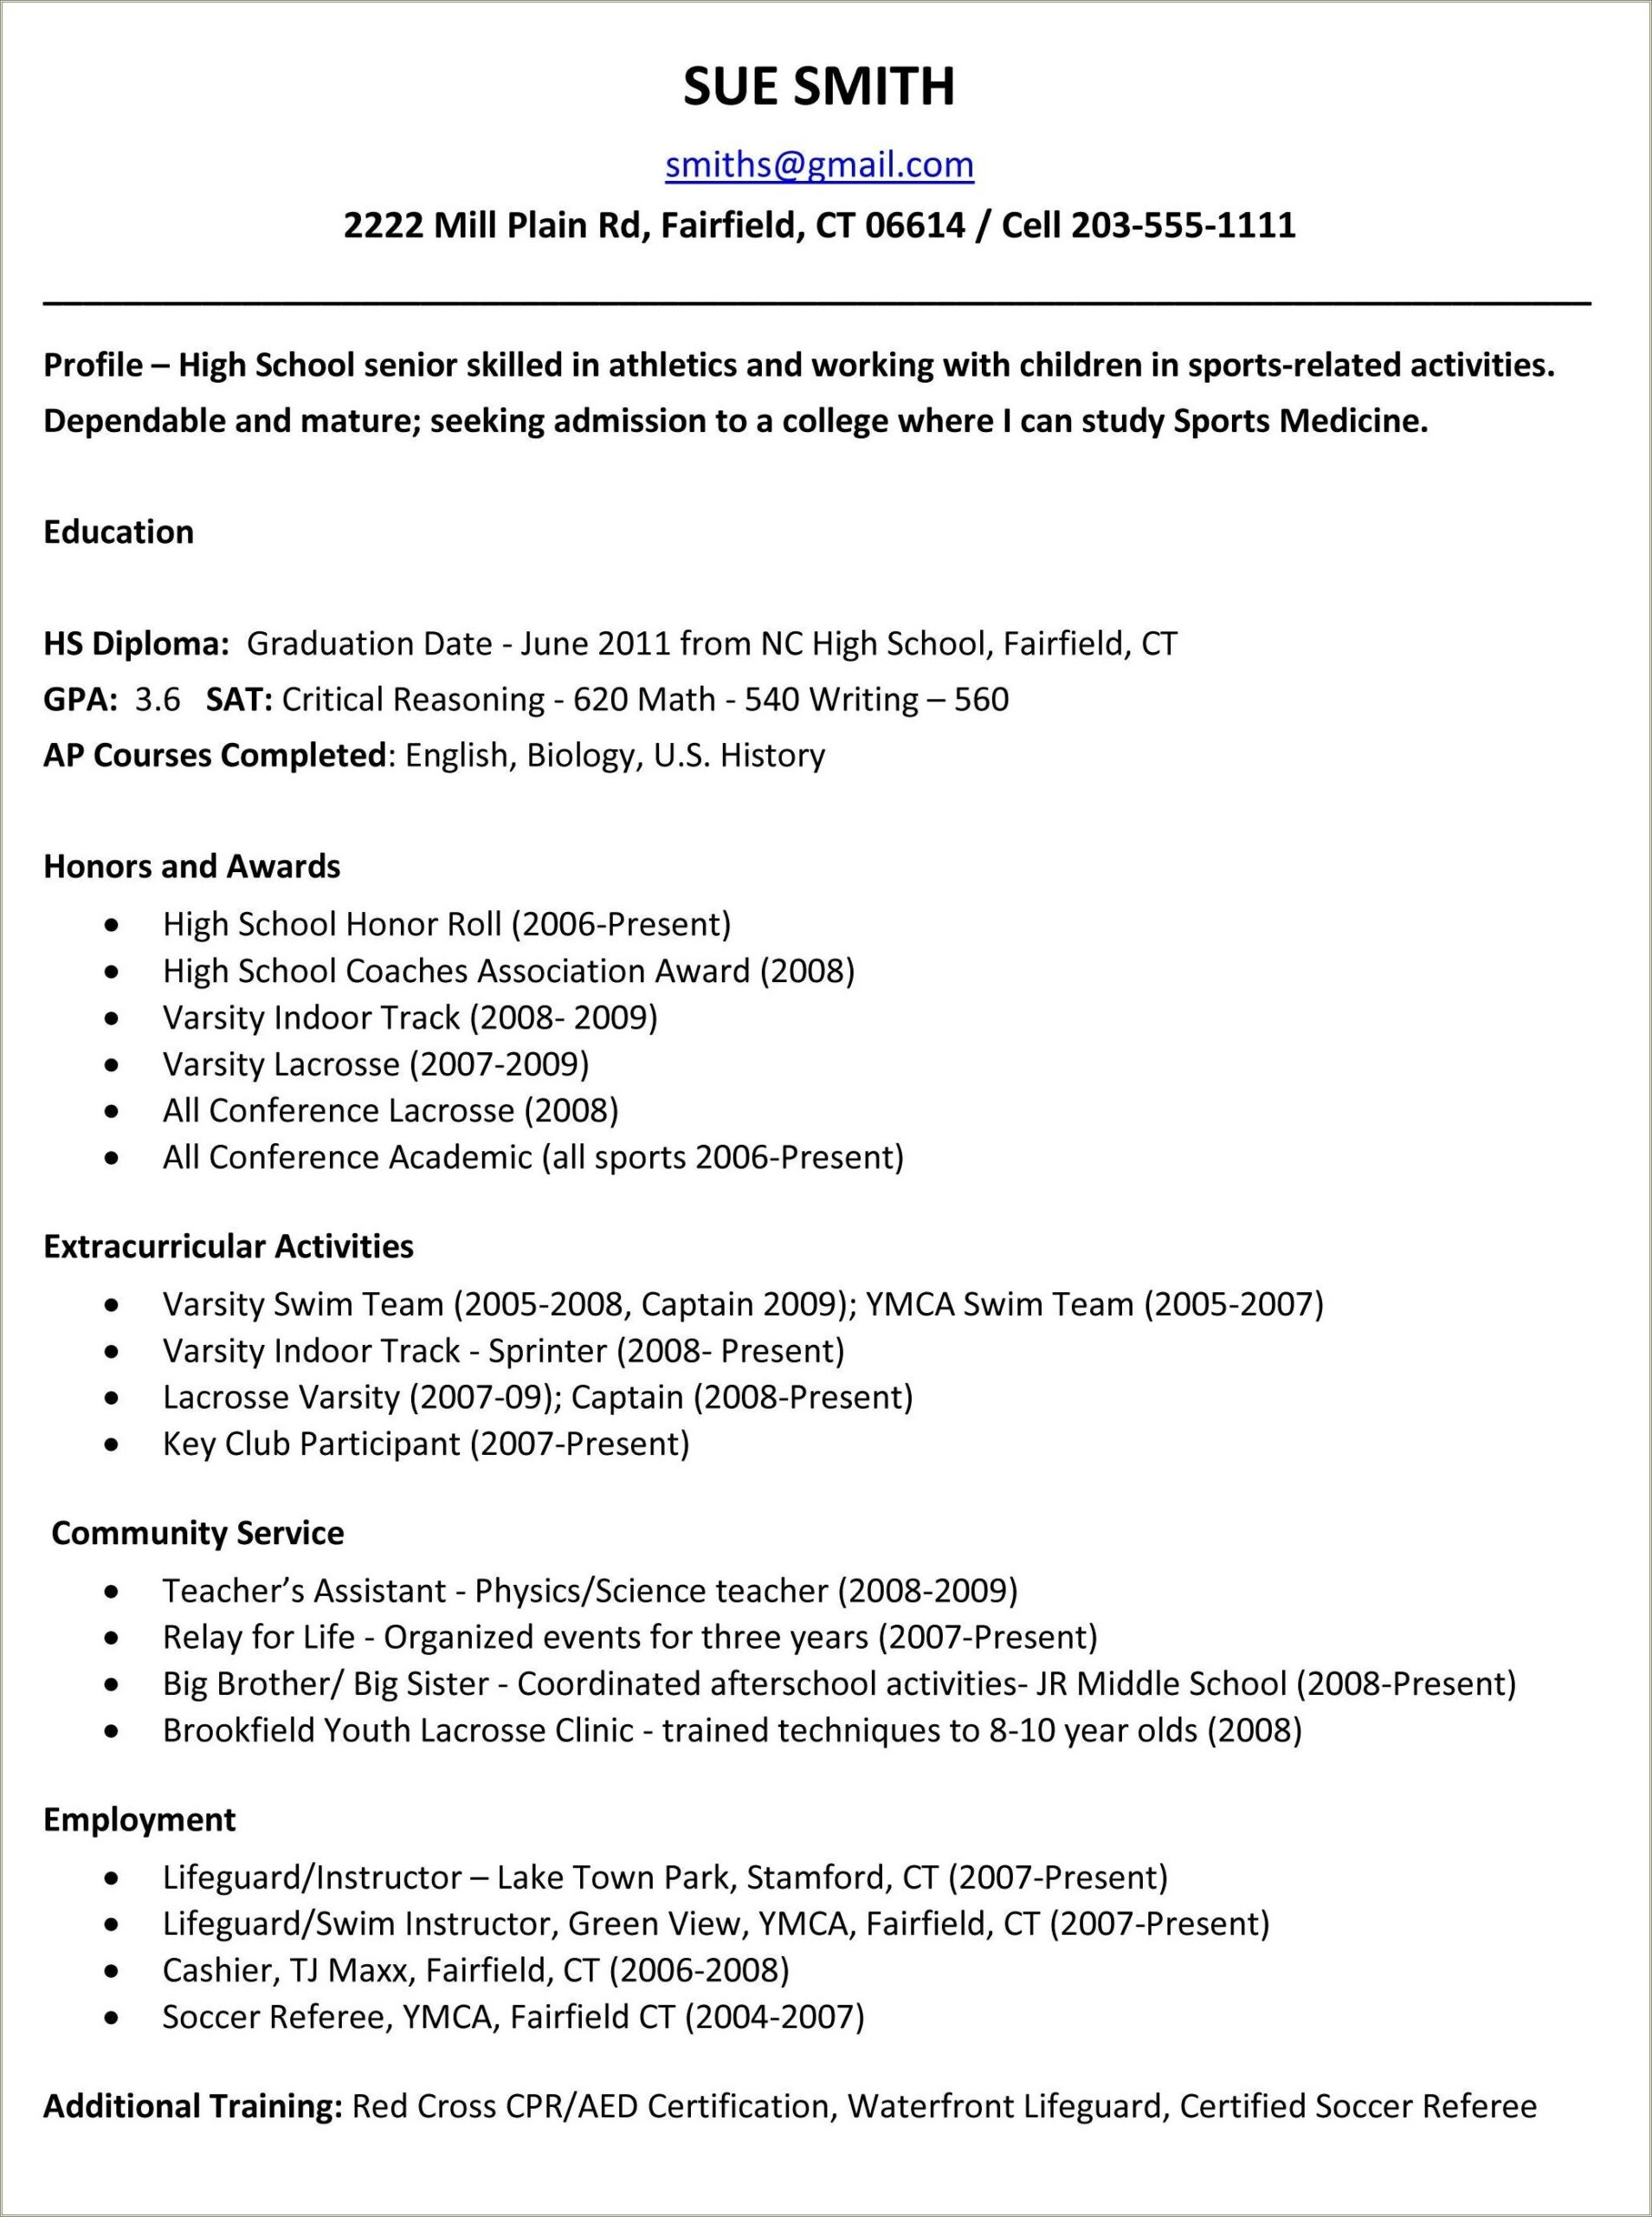 Examples Of High School Runners Resumes